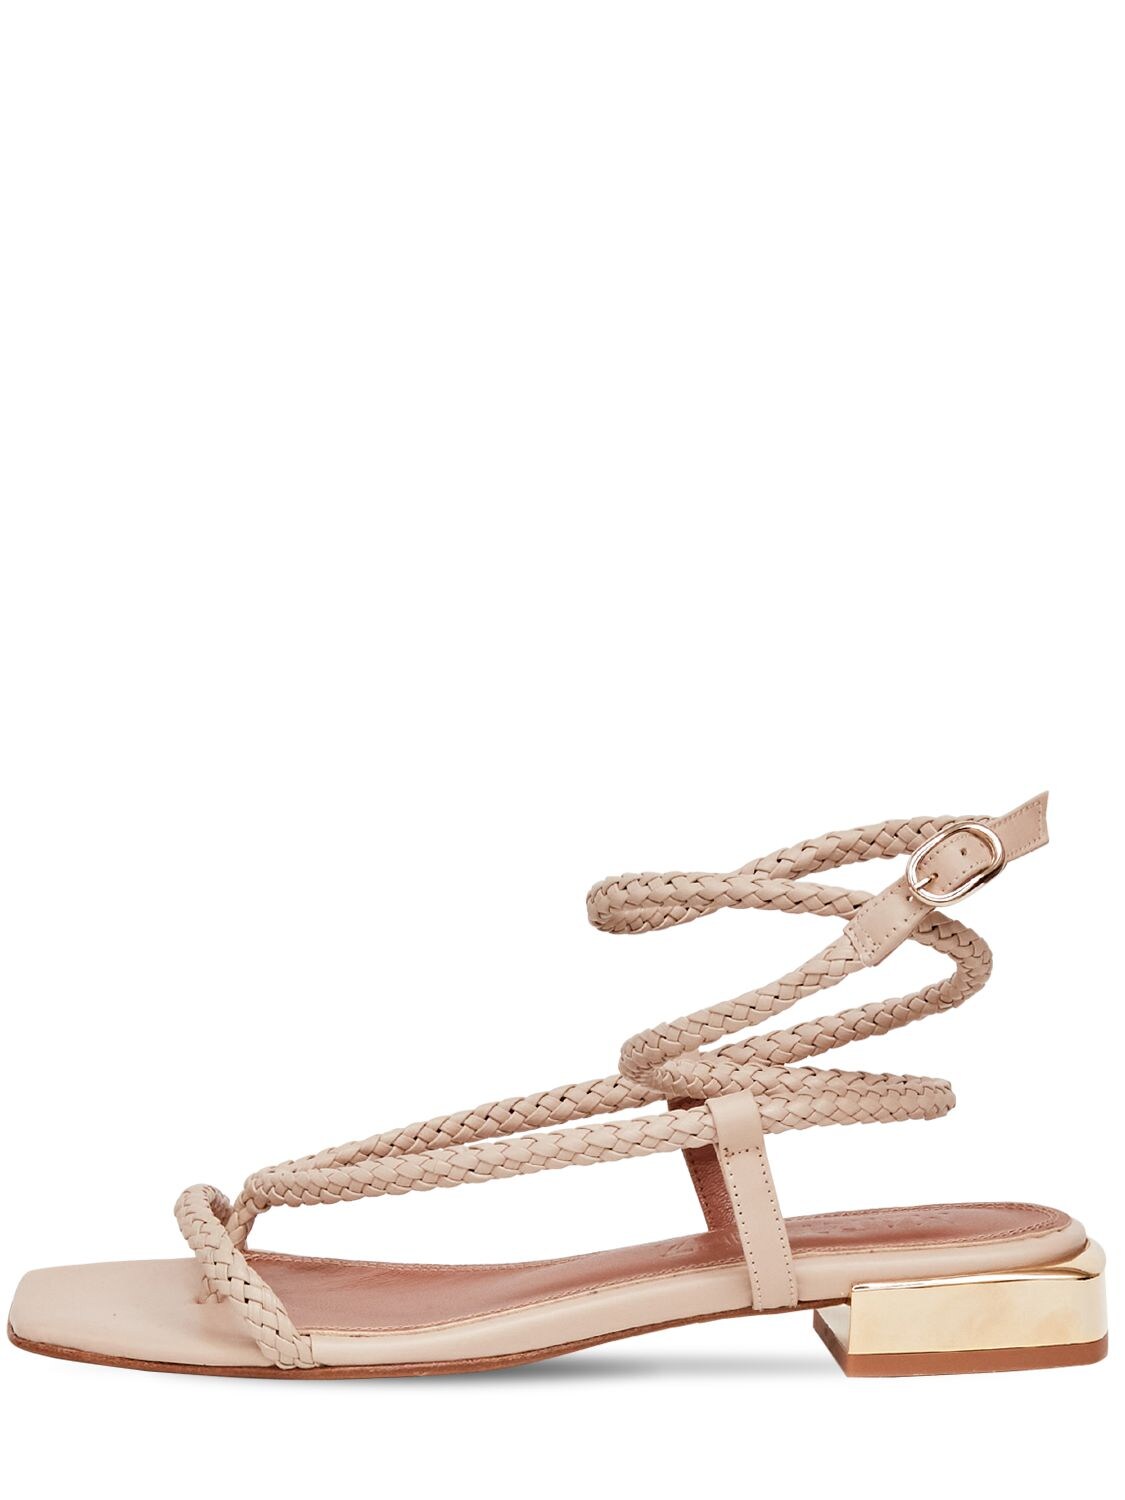 Souliers Martinez 25mm Woven Leather Thong Sandals In Beige